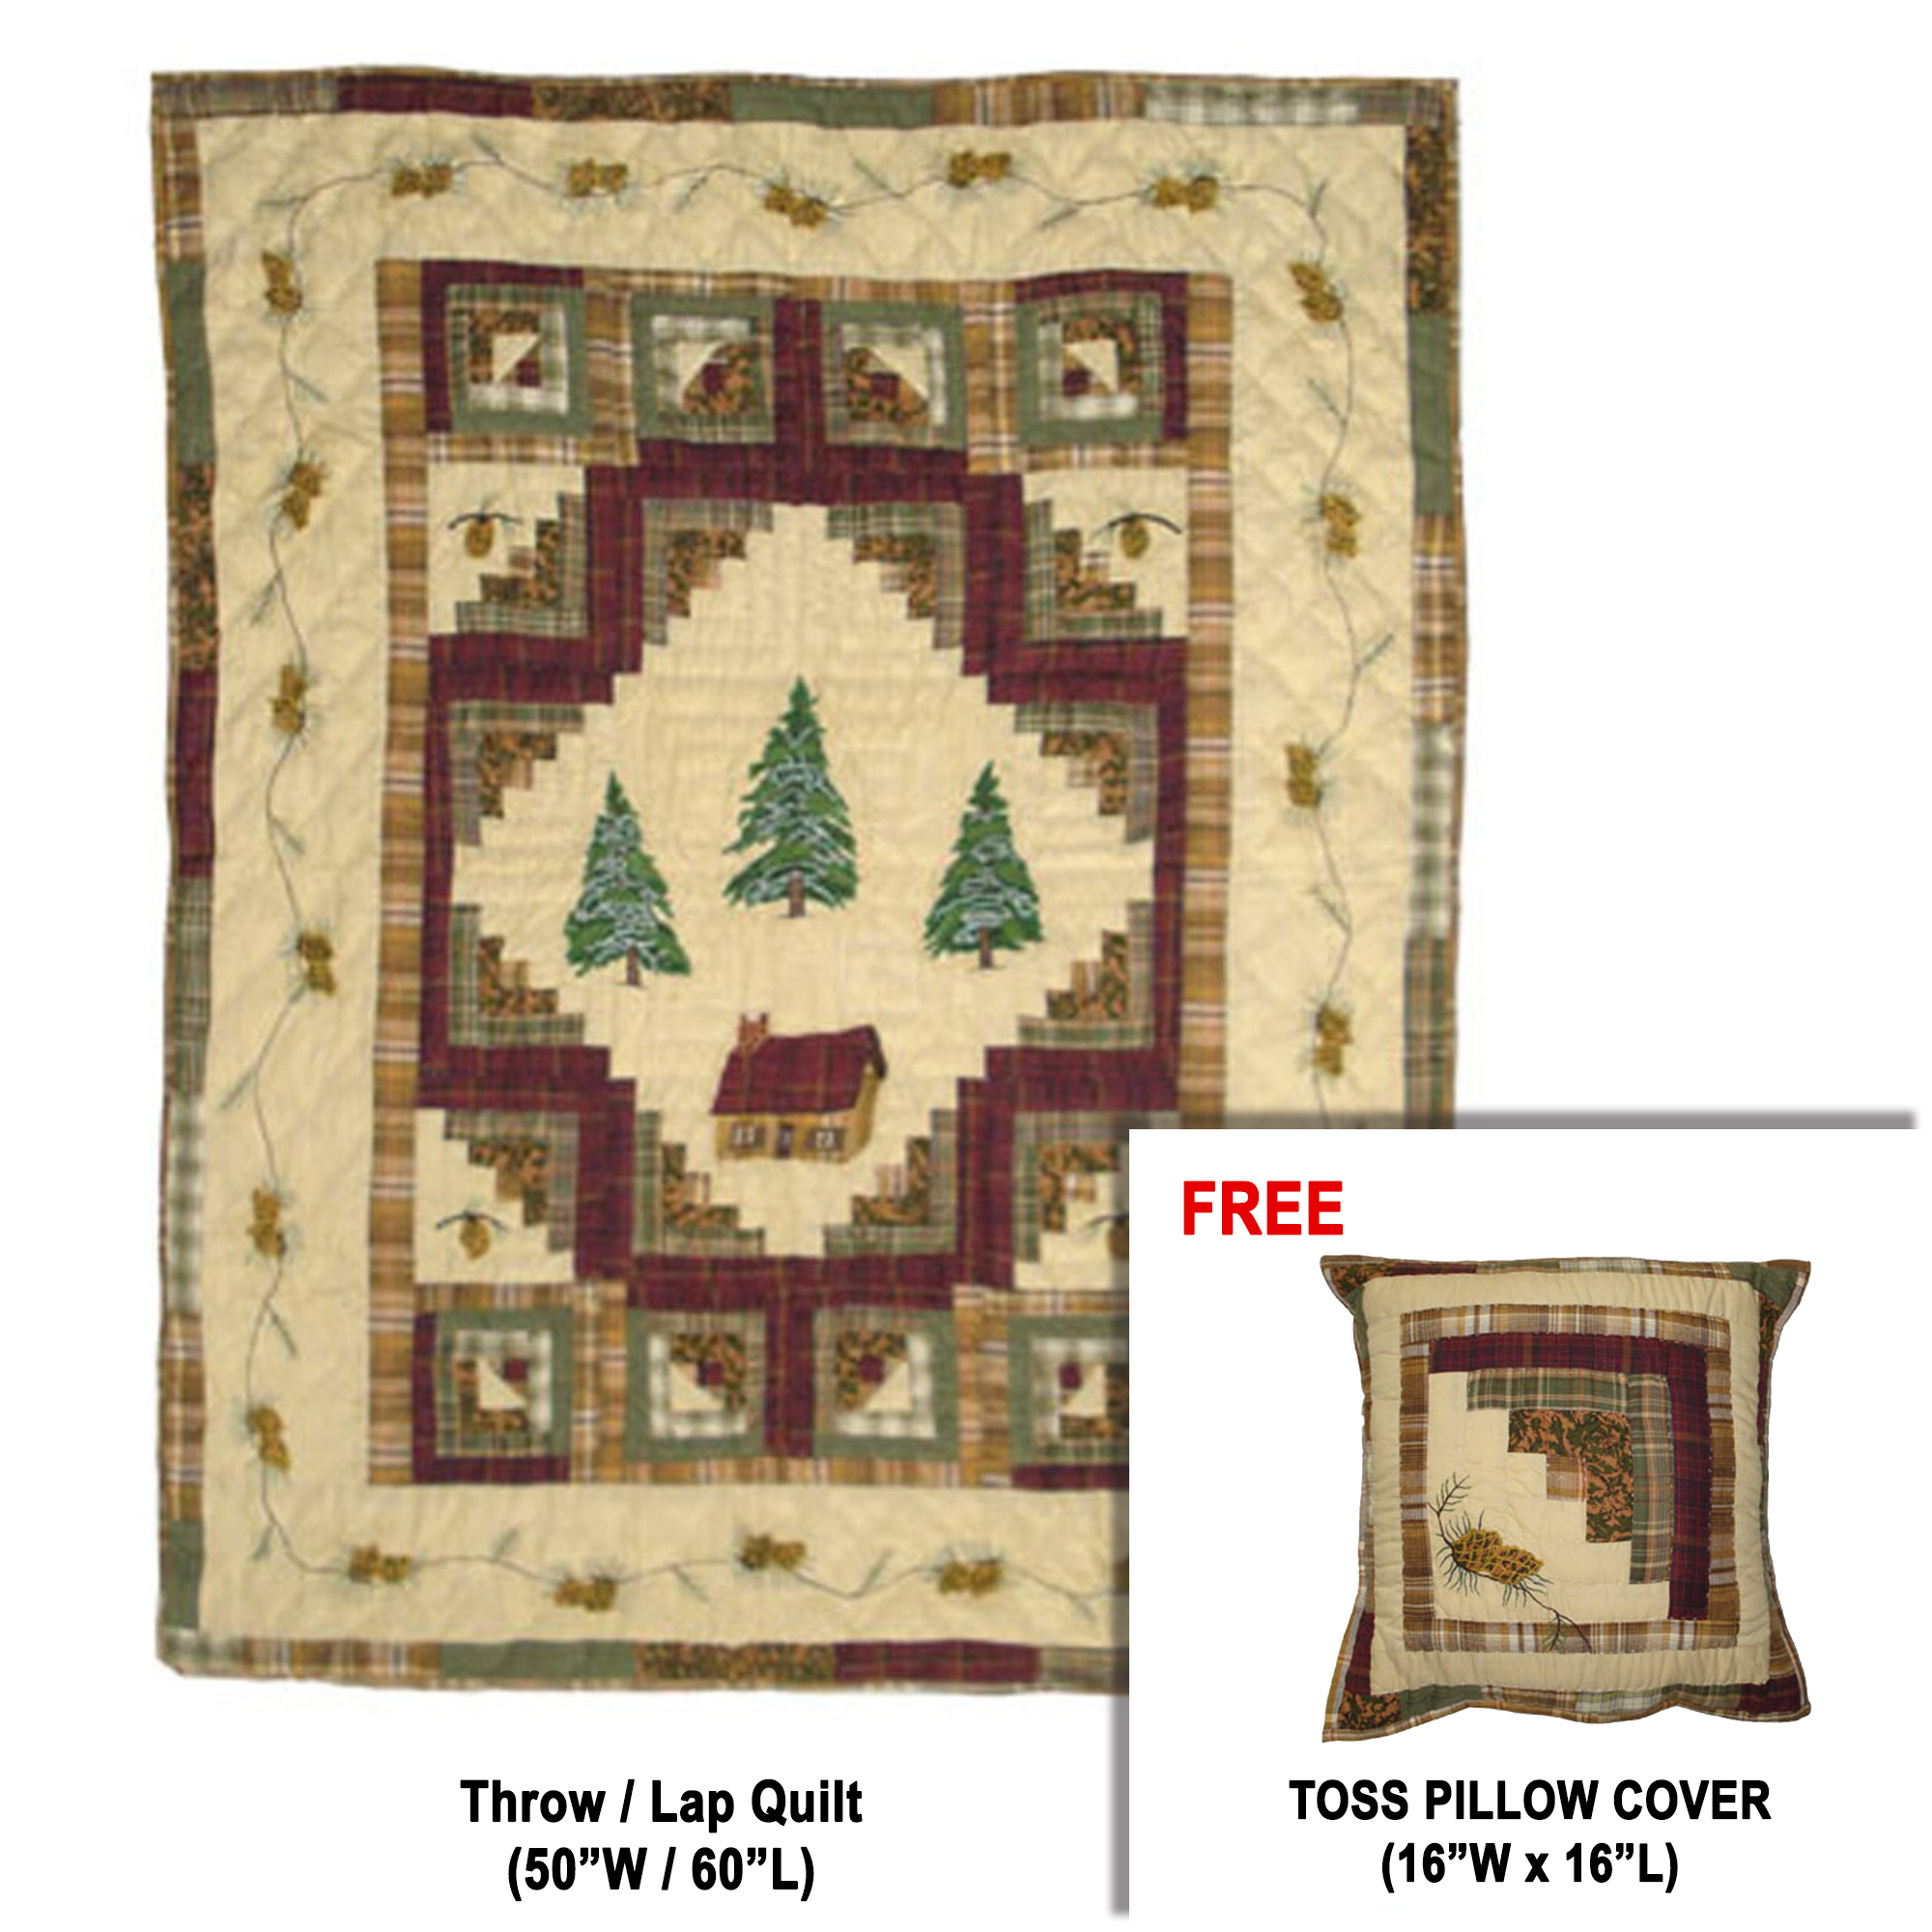 Forest Log Cabin Throw 50"W x 60"L | Buy a Throw / lap Quilt and Get a matching Toss Pillow Cover (16"W x 16"L) FREE